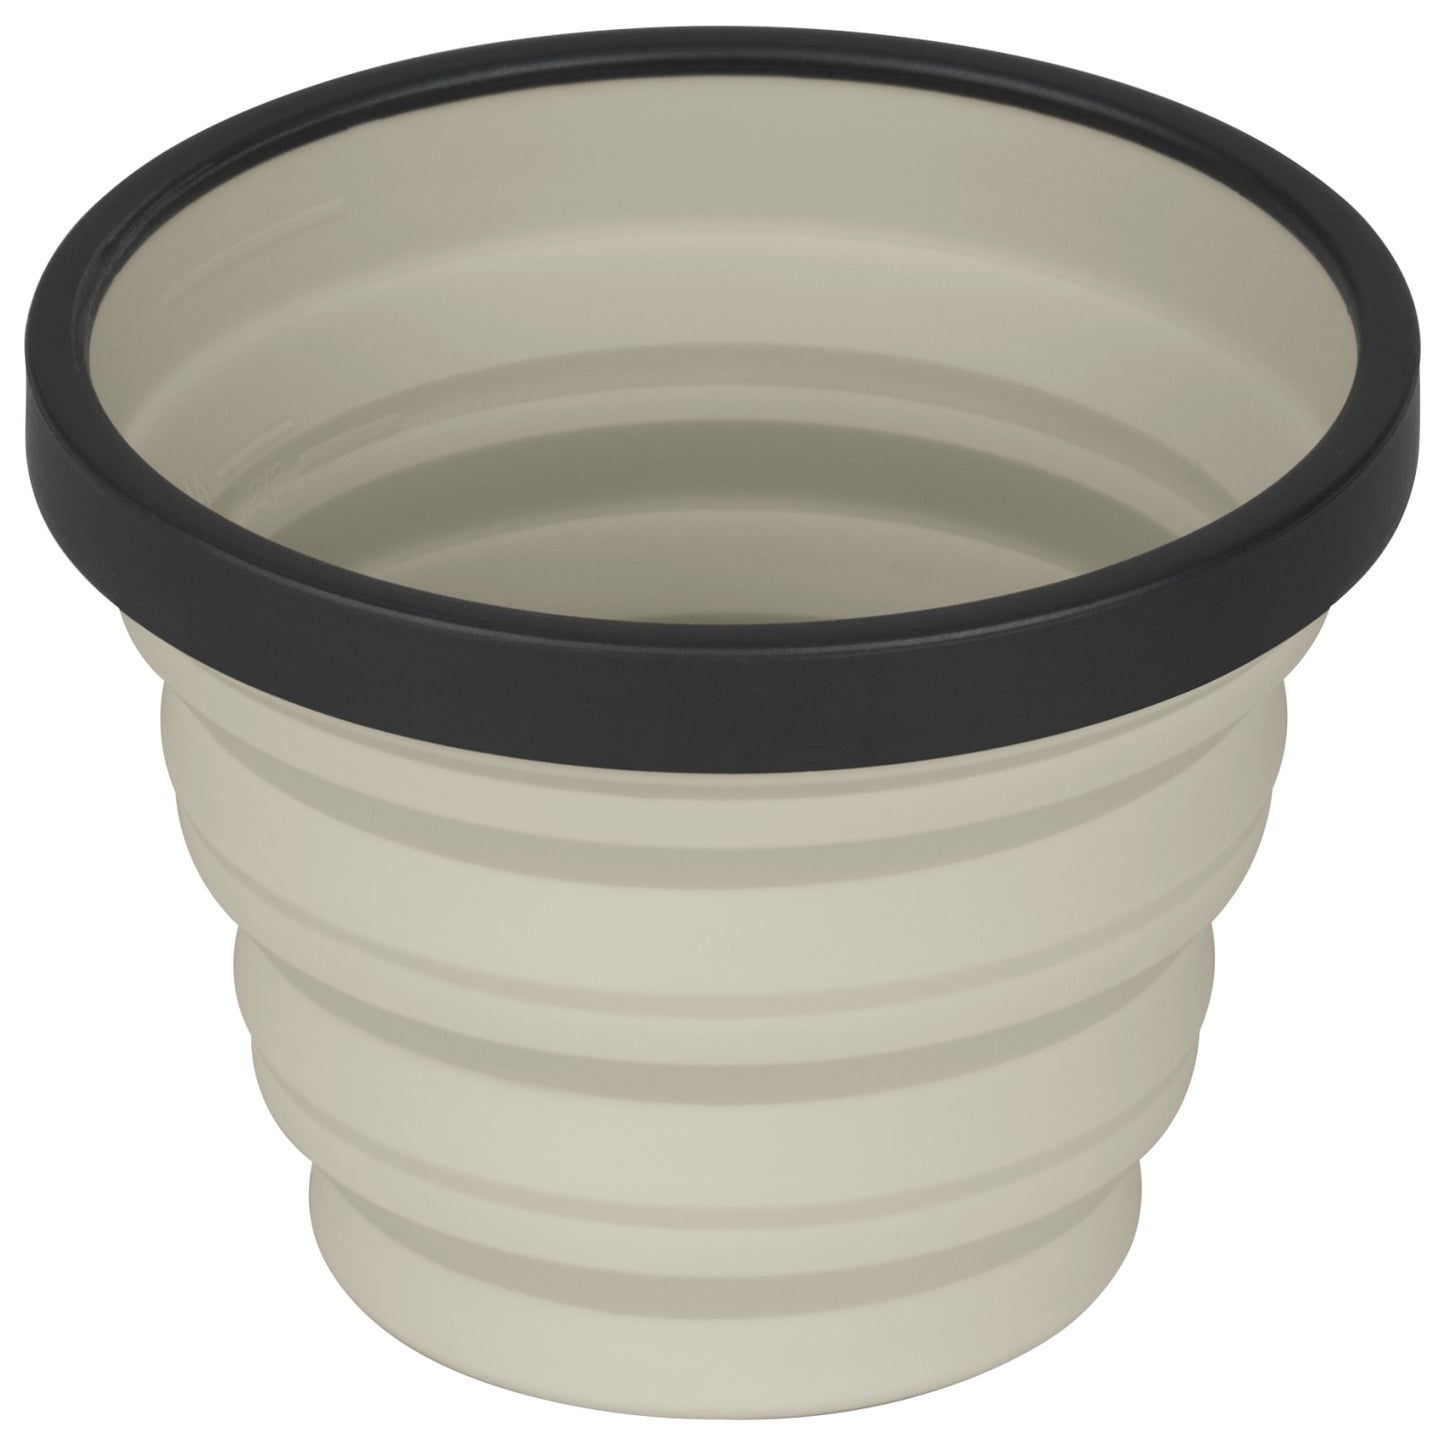 Sand coloured silicone collapsible X cup by Sea to Summit.